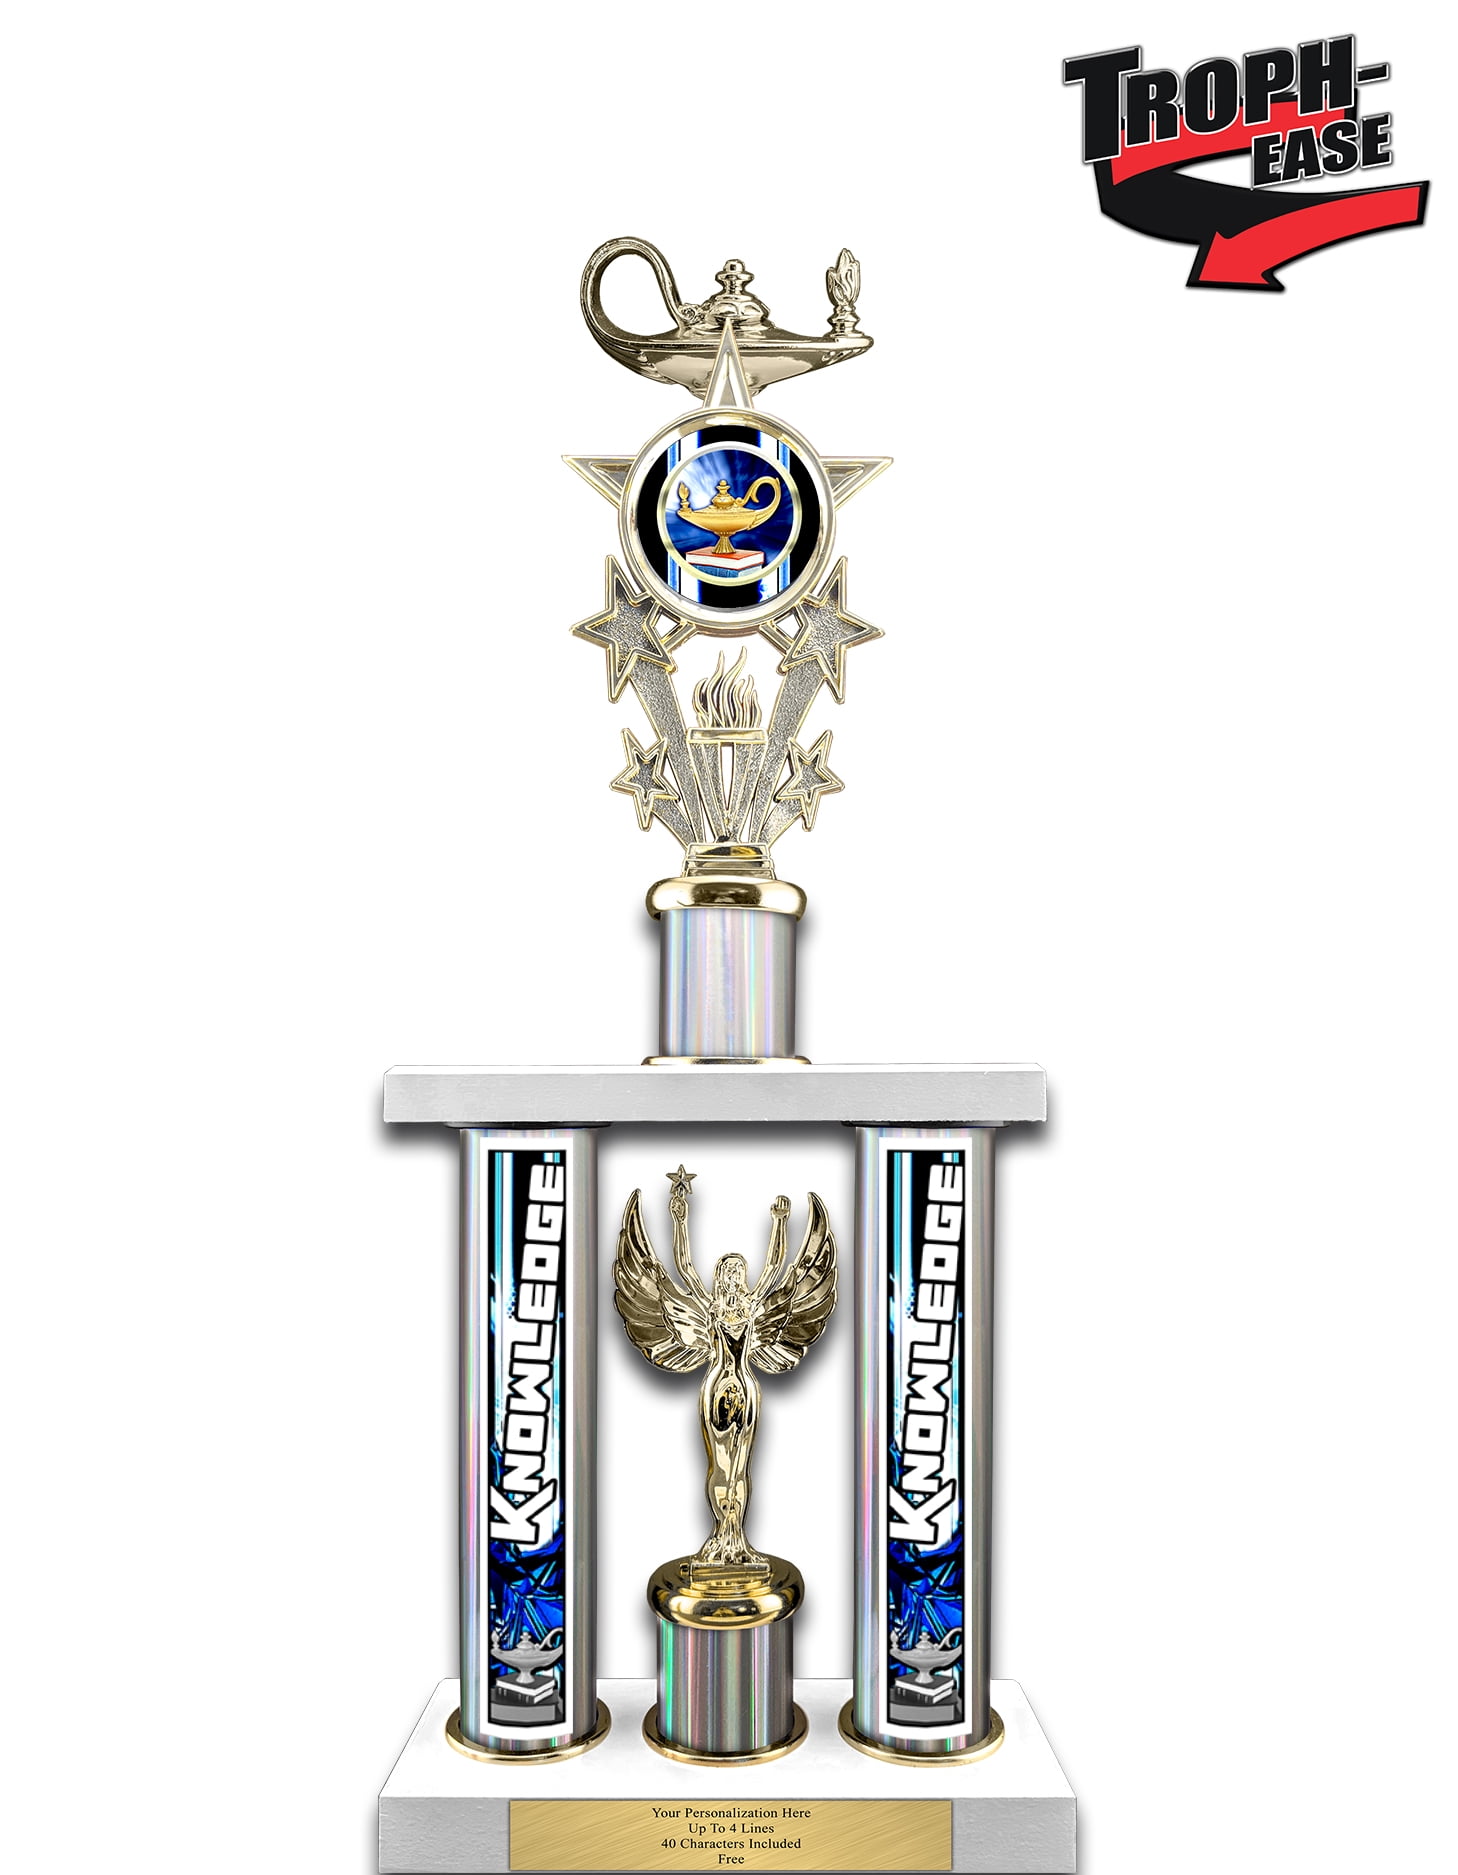 TROPHY CUP AWARD 3 SIZES AVAILABLE ENGRAVED FREE EMBLEM SILVER CUPS TROPHIES 